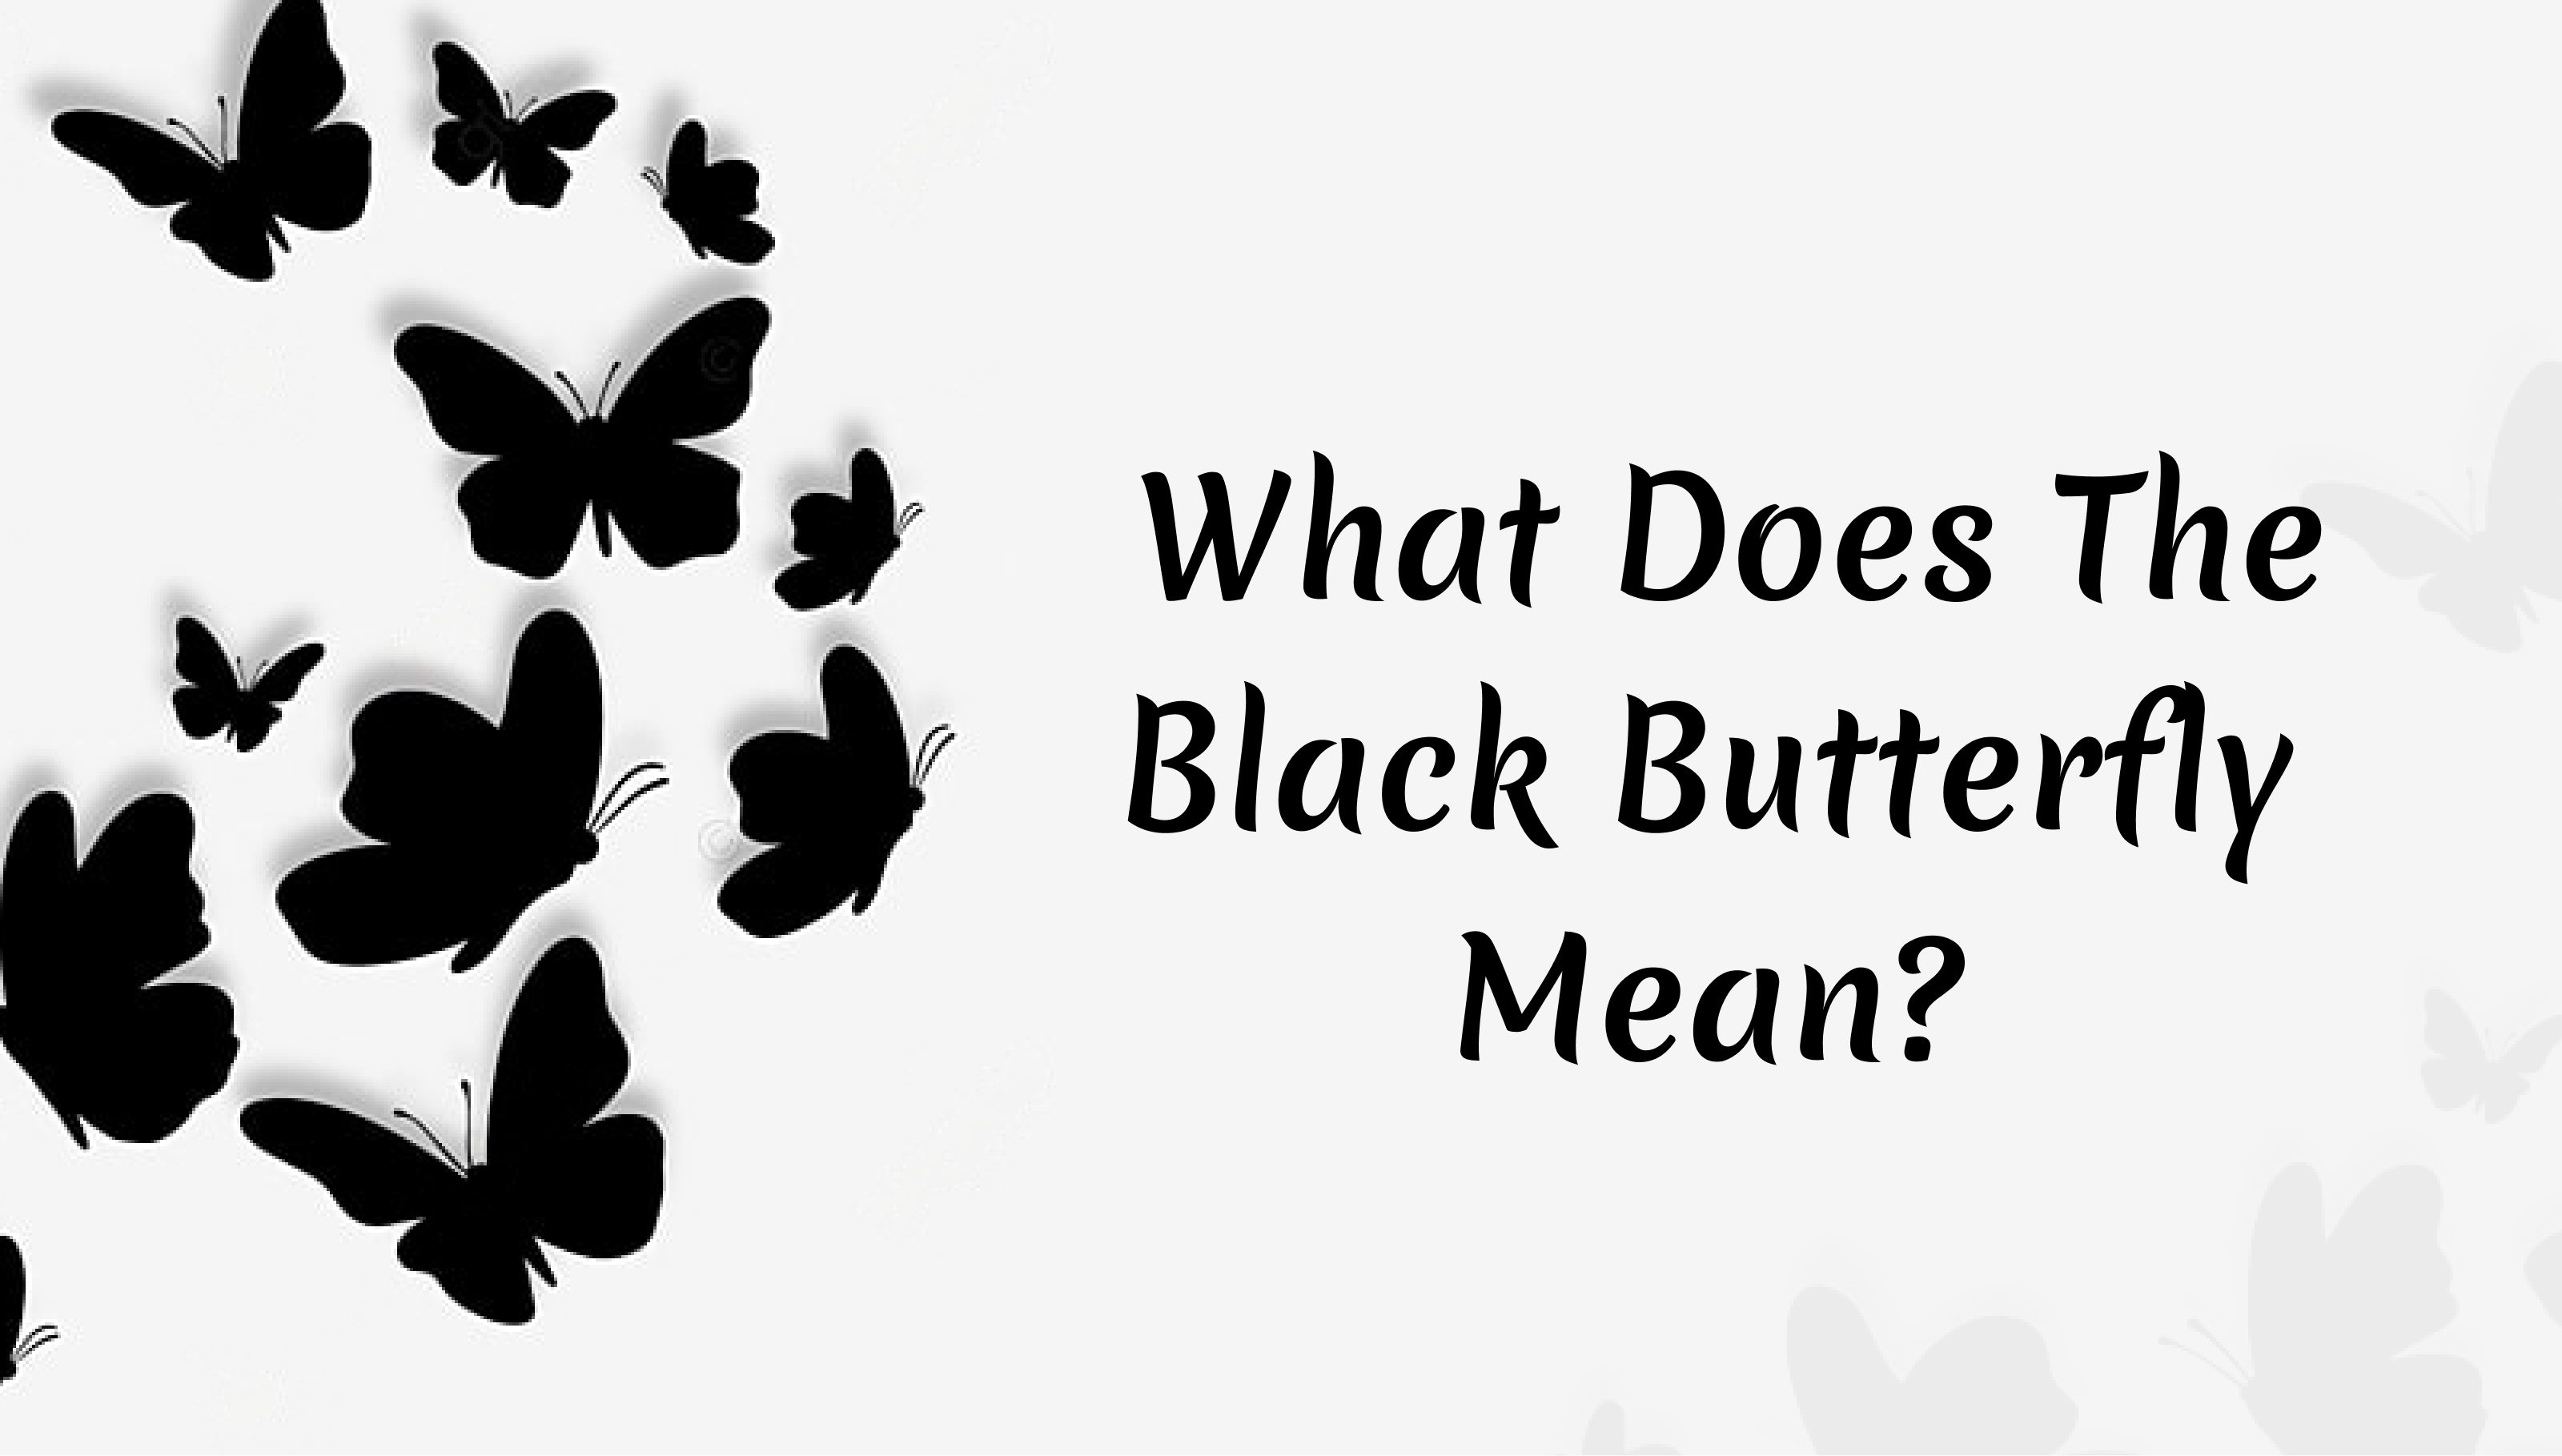 Black Butterfly Meaning – What Does The Black Butterfly Mean?